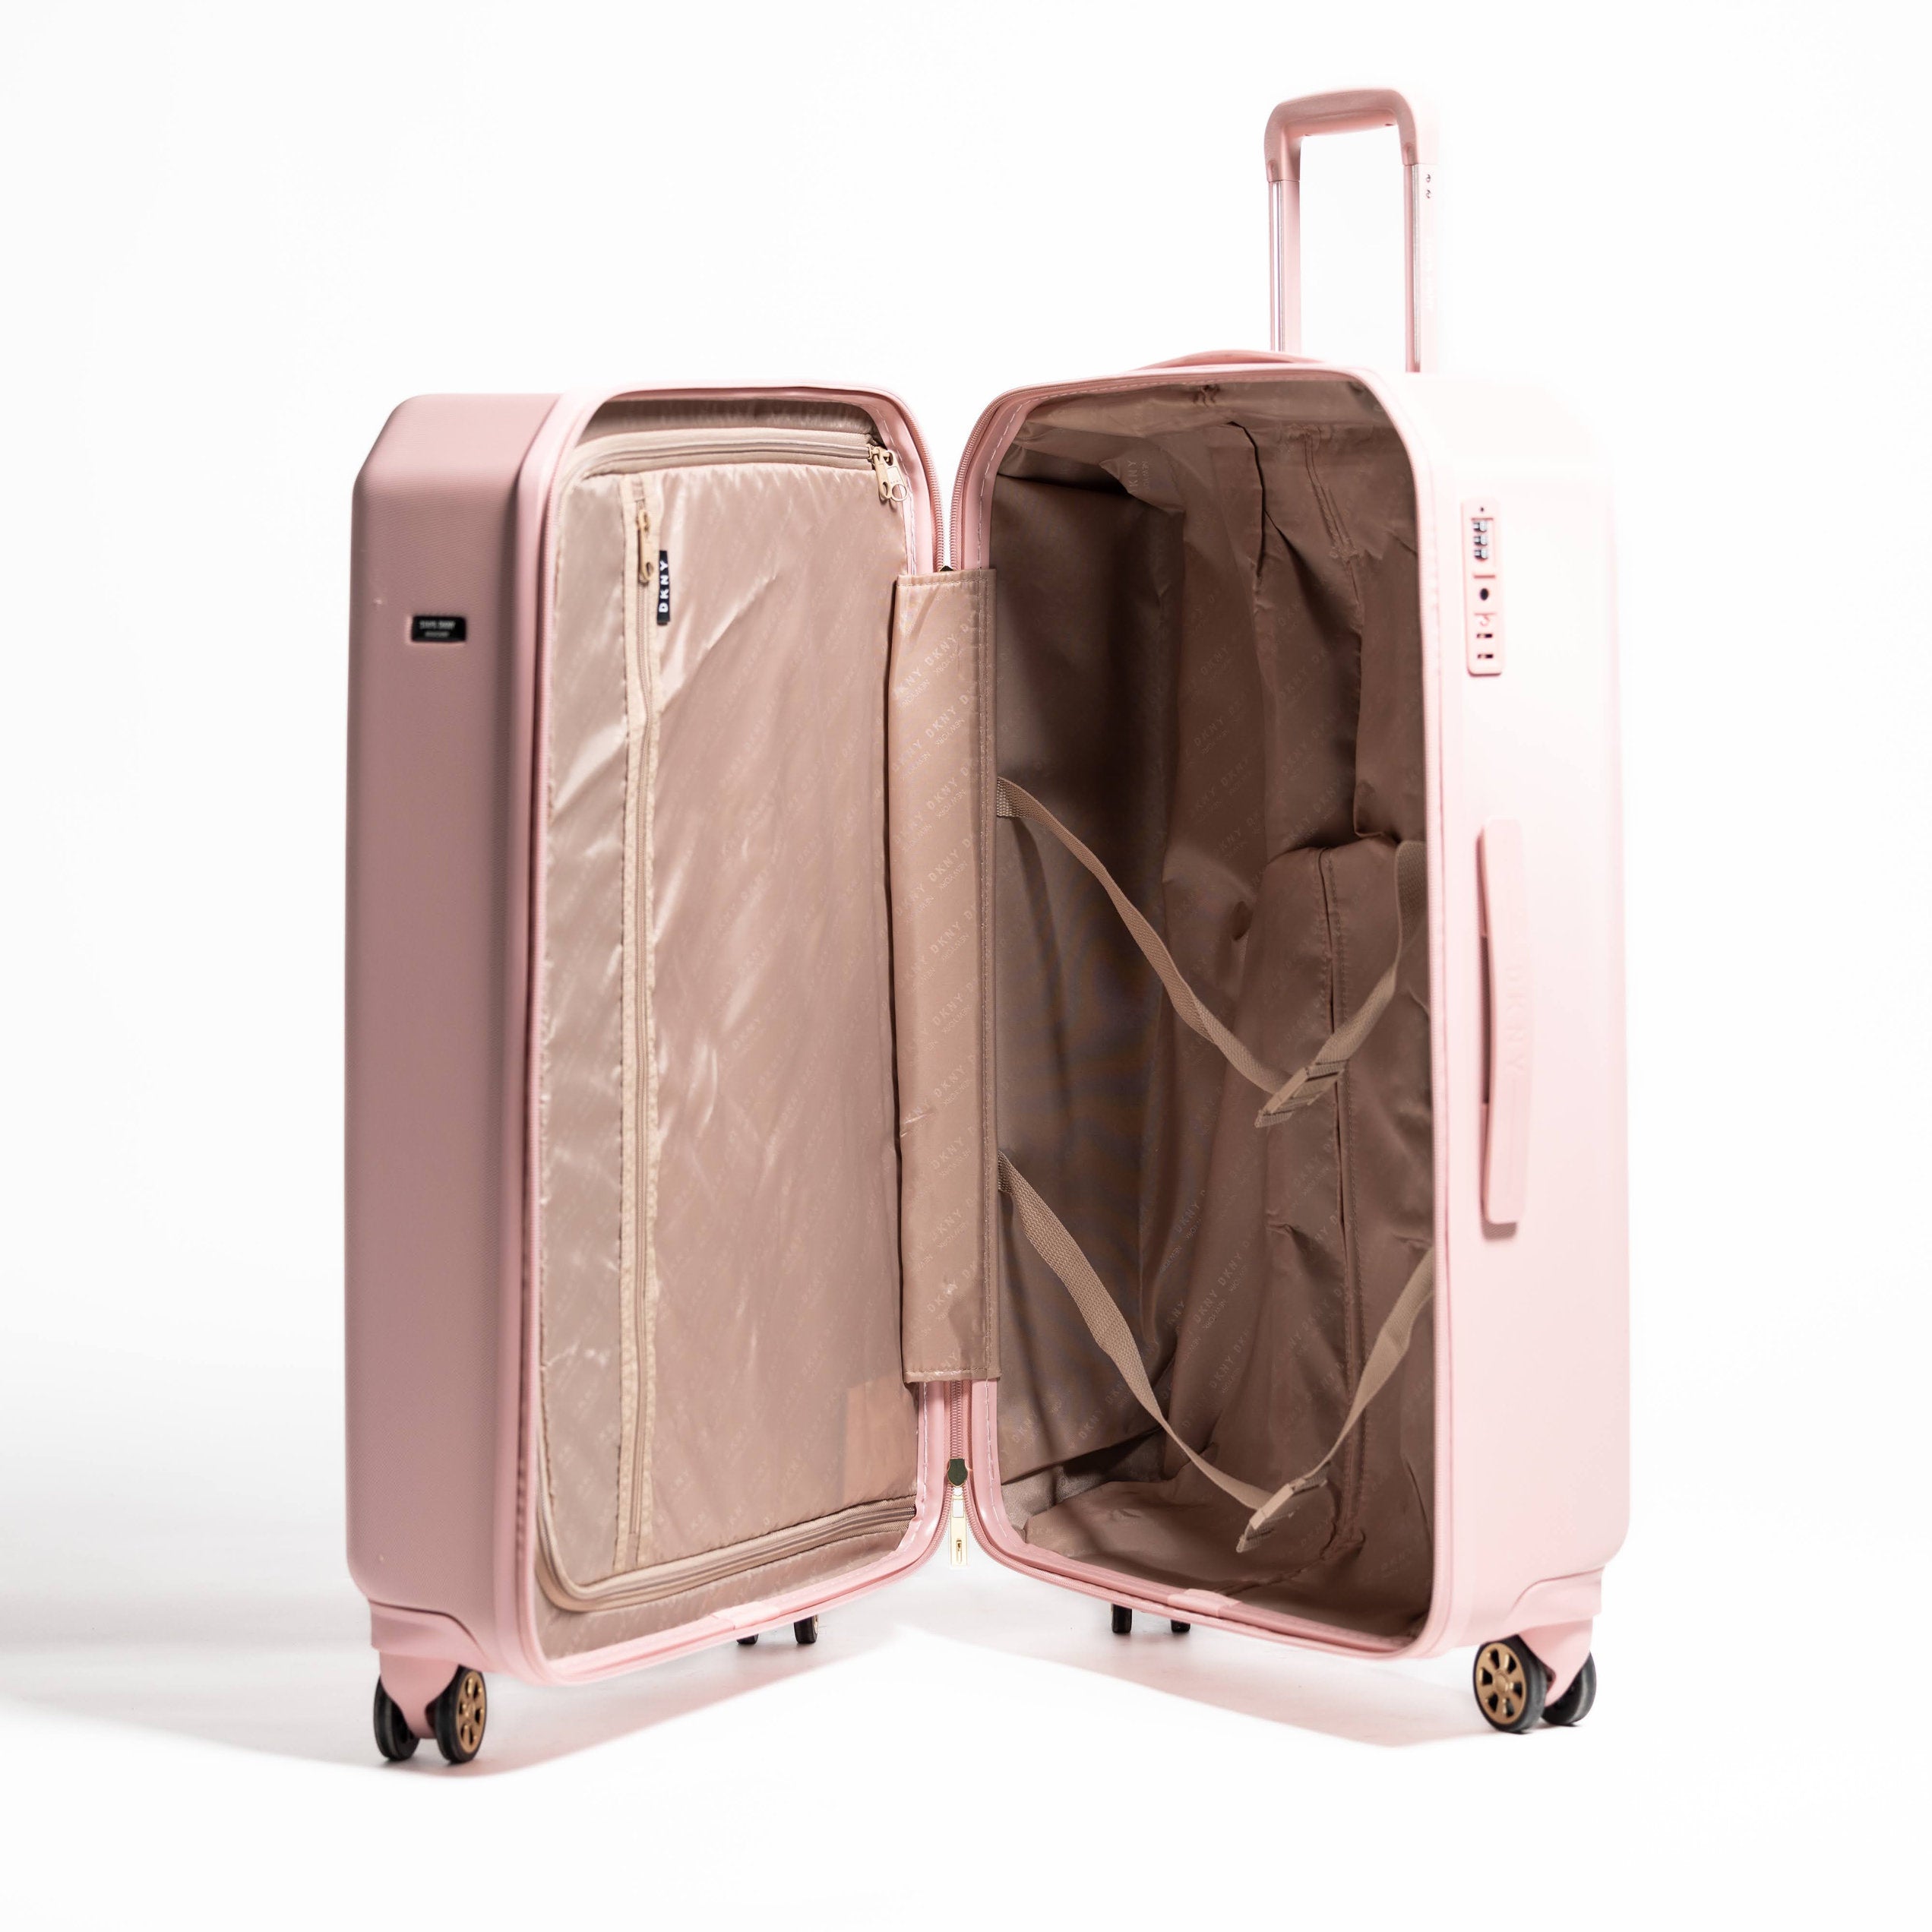 DKNY Rosey Large Luggage_DH818CC4_RO9_04